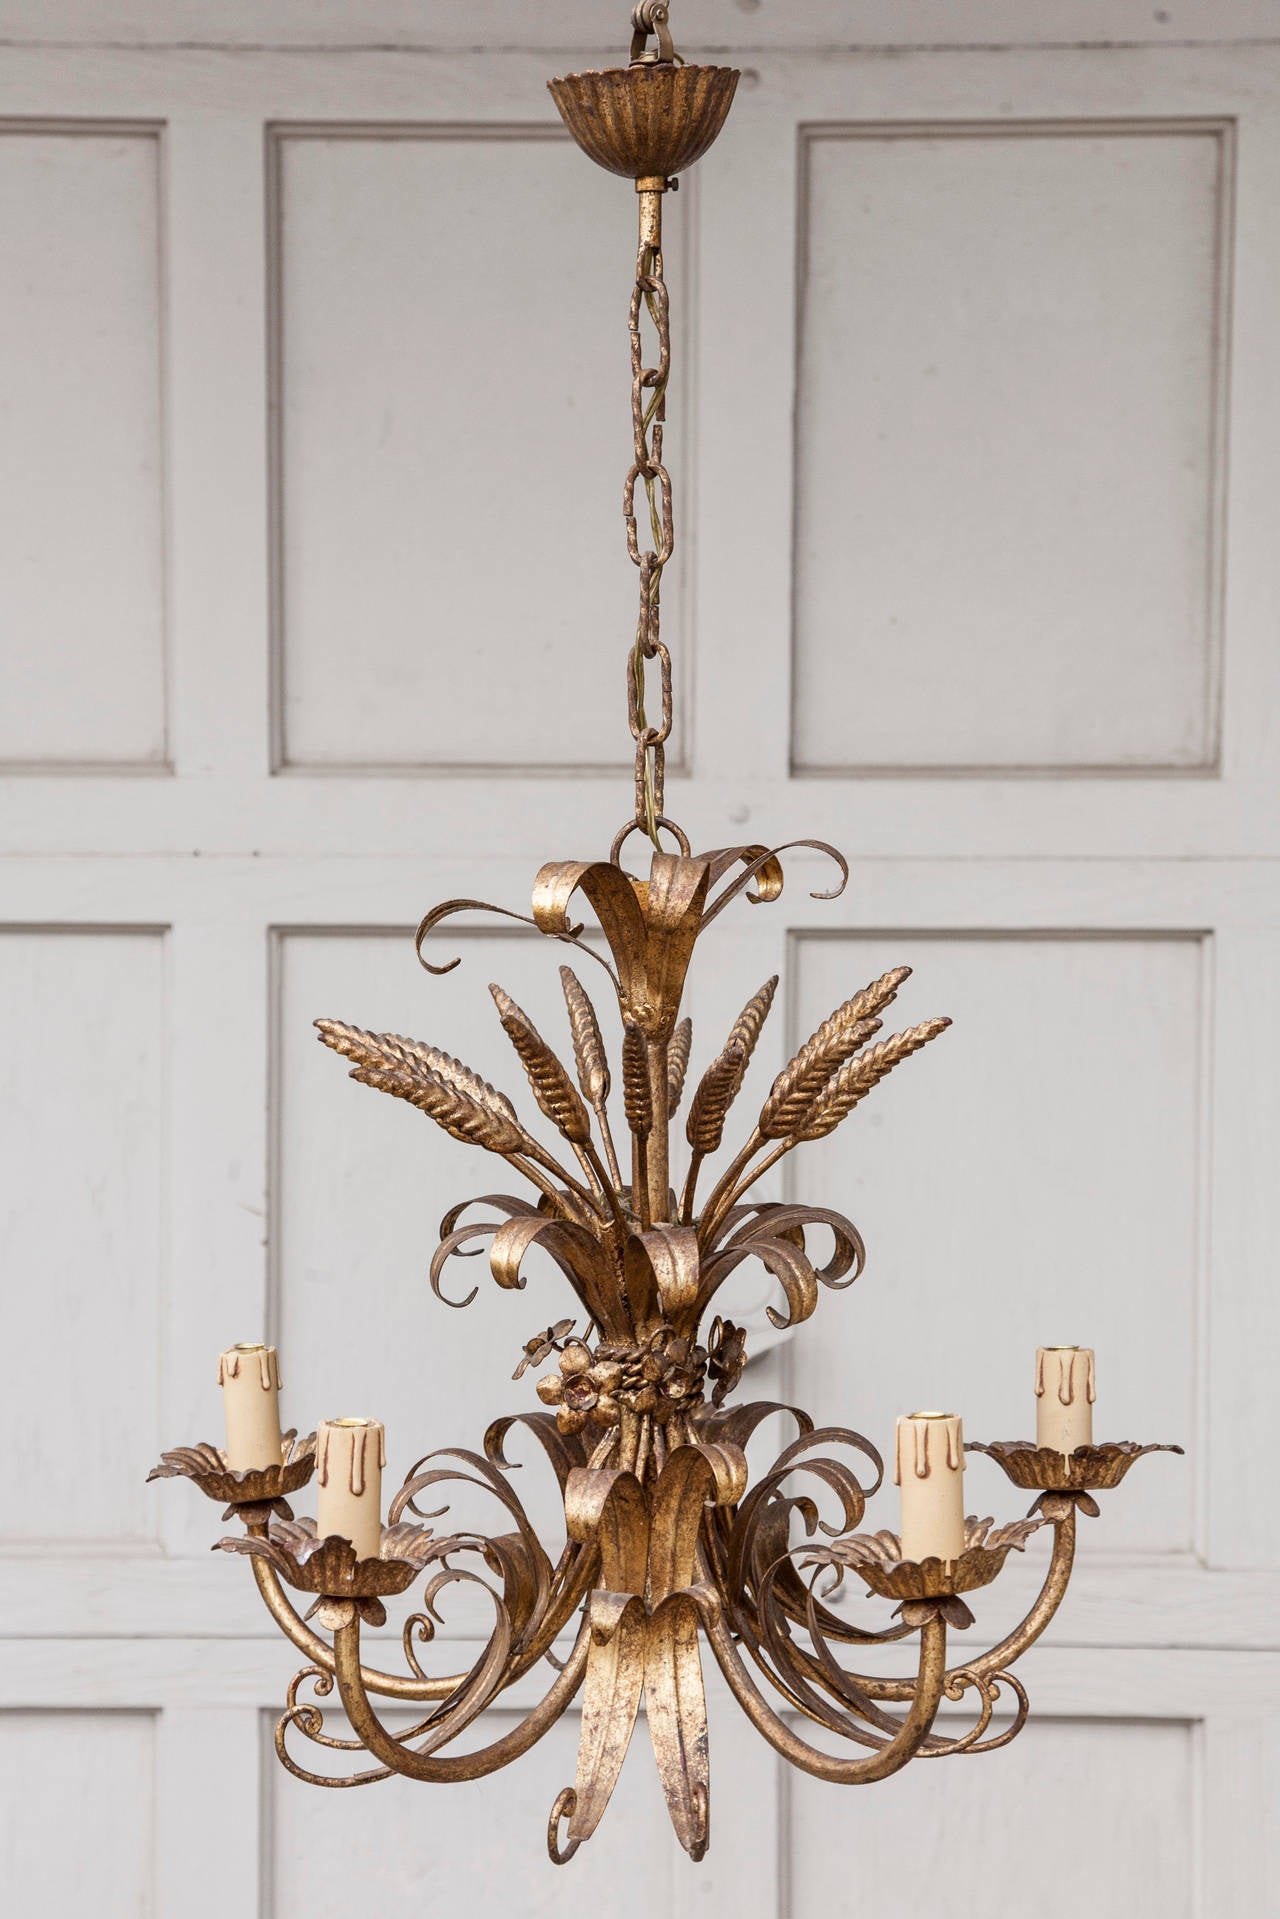 This Classic Regency motif chandelier featuring sheaves of wheat is a handsome blend of modern and historical styles. With a beautifully aged gilt tole surface and five candelabrum, it will cast a warm light for any space, circa 1920.